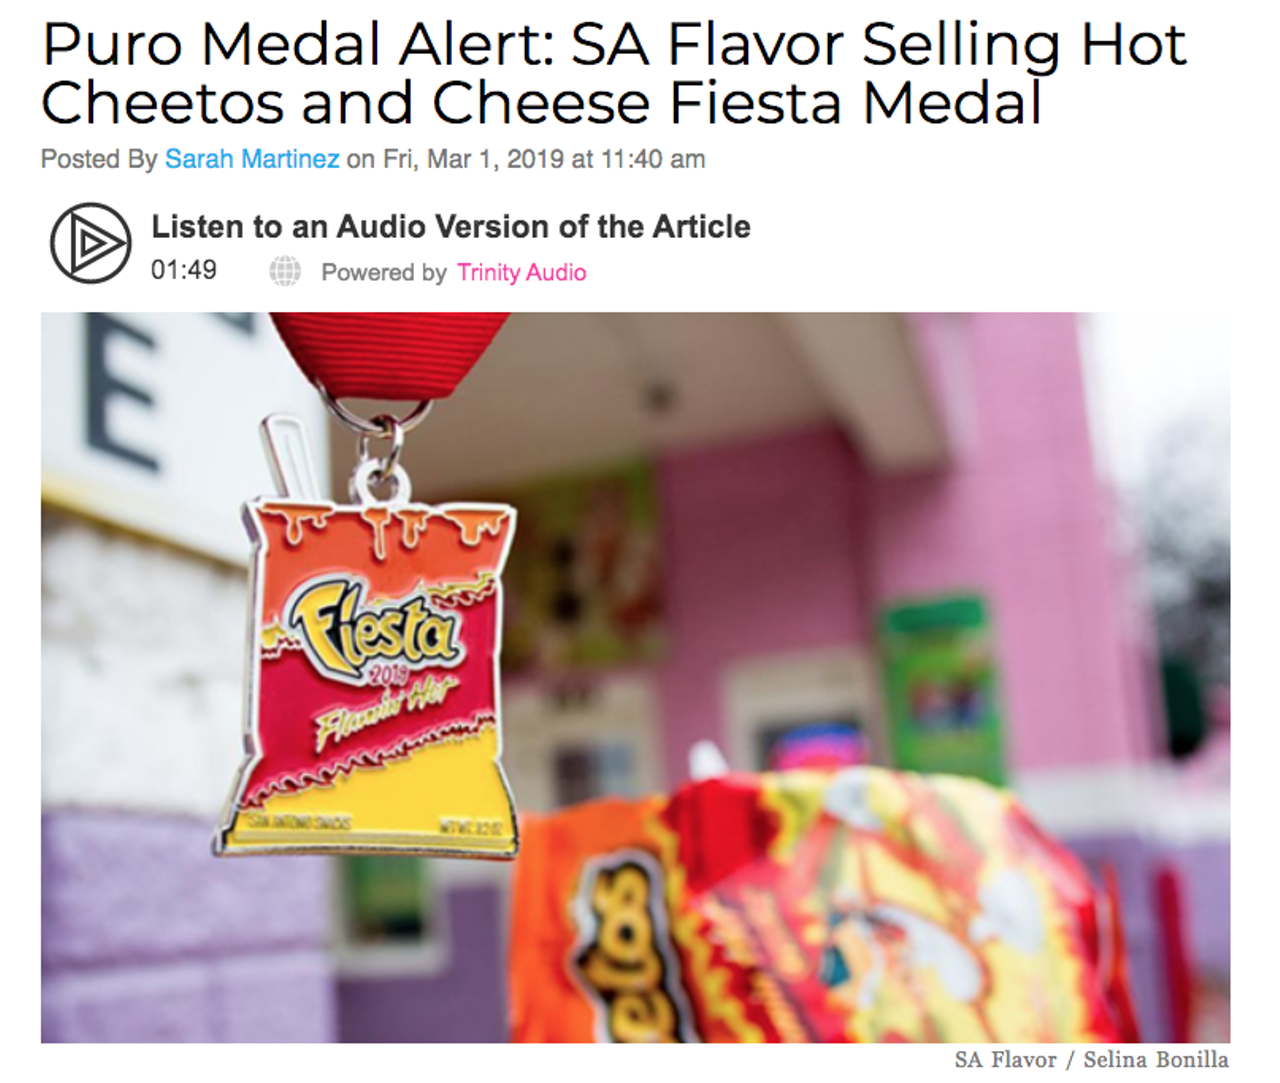 While lots of Fiesta medals can get pretty puro, this one may just take the cake. Or shall we say bag of Hot Cheetos and cheese? You get the point. Read more here.